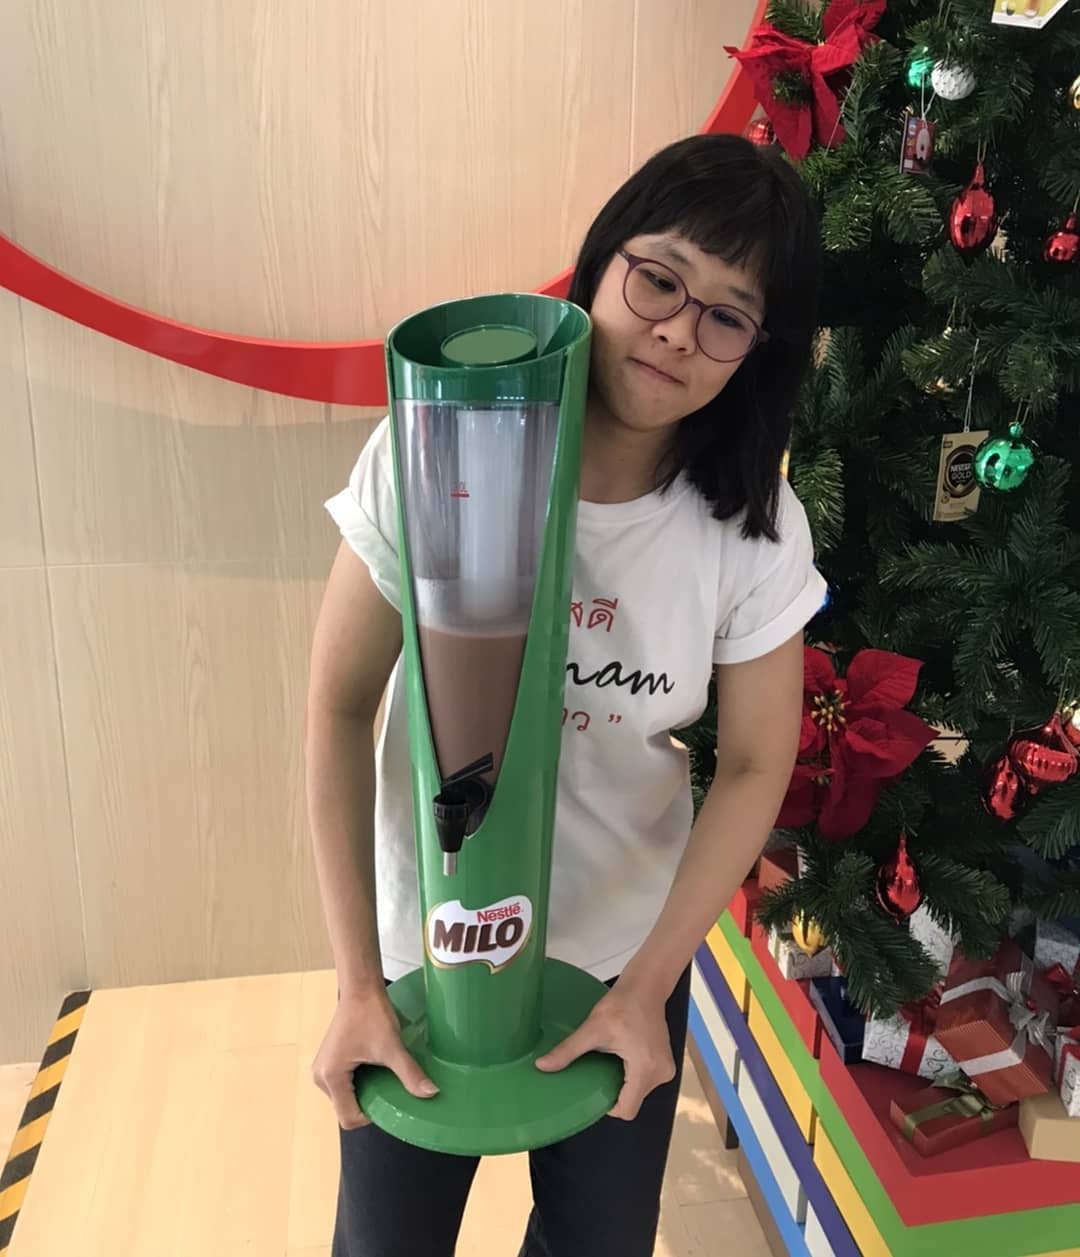 Famous Milo Tower From Singapore Is Coming To BKK's Samyan Mitrtown For Thai Fans To Try